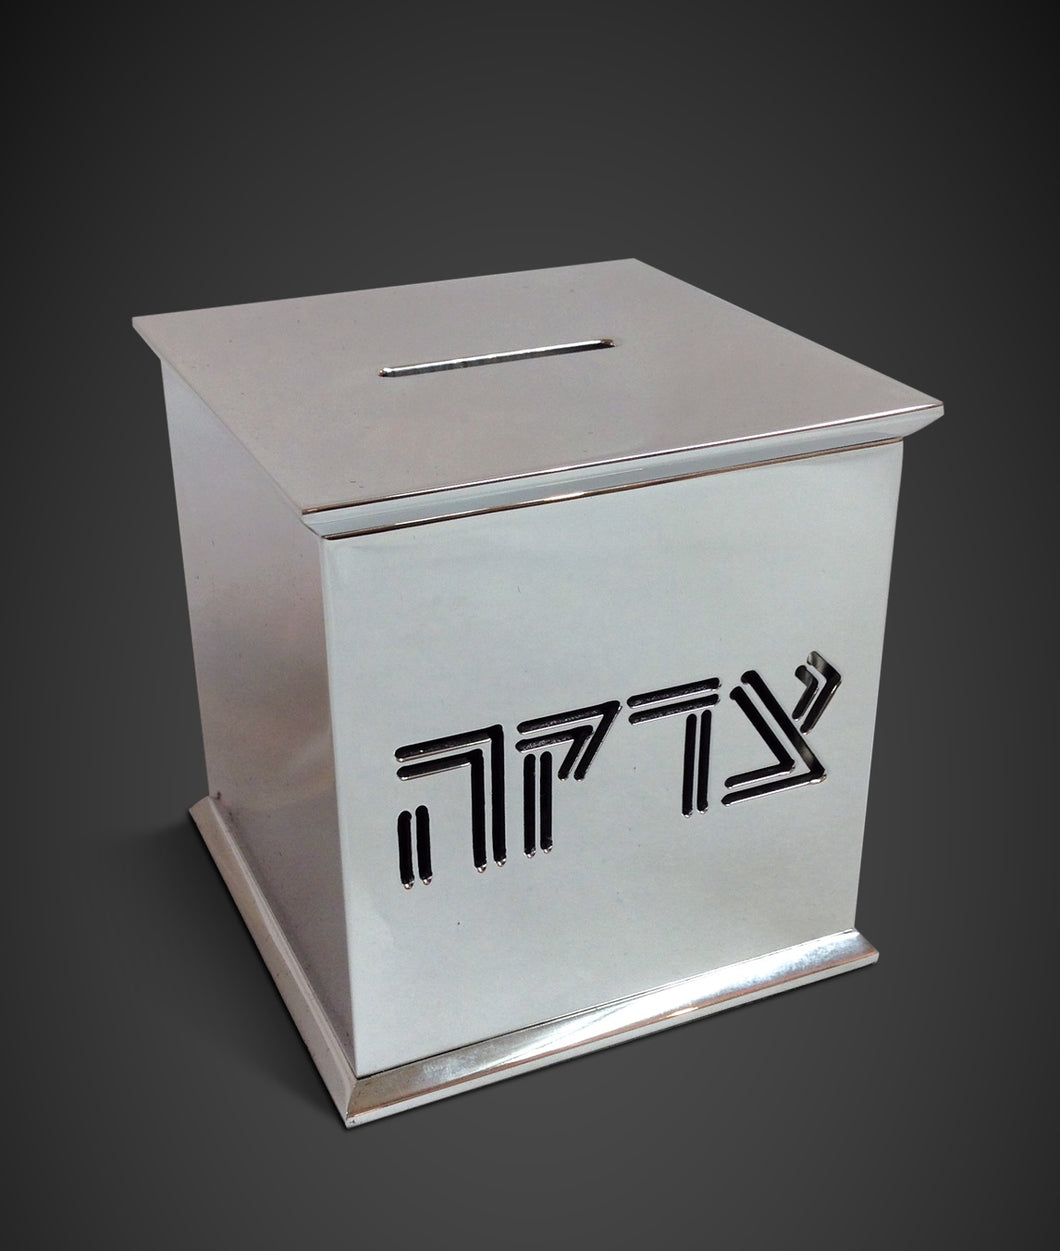 The Cube Charity box